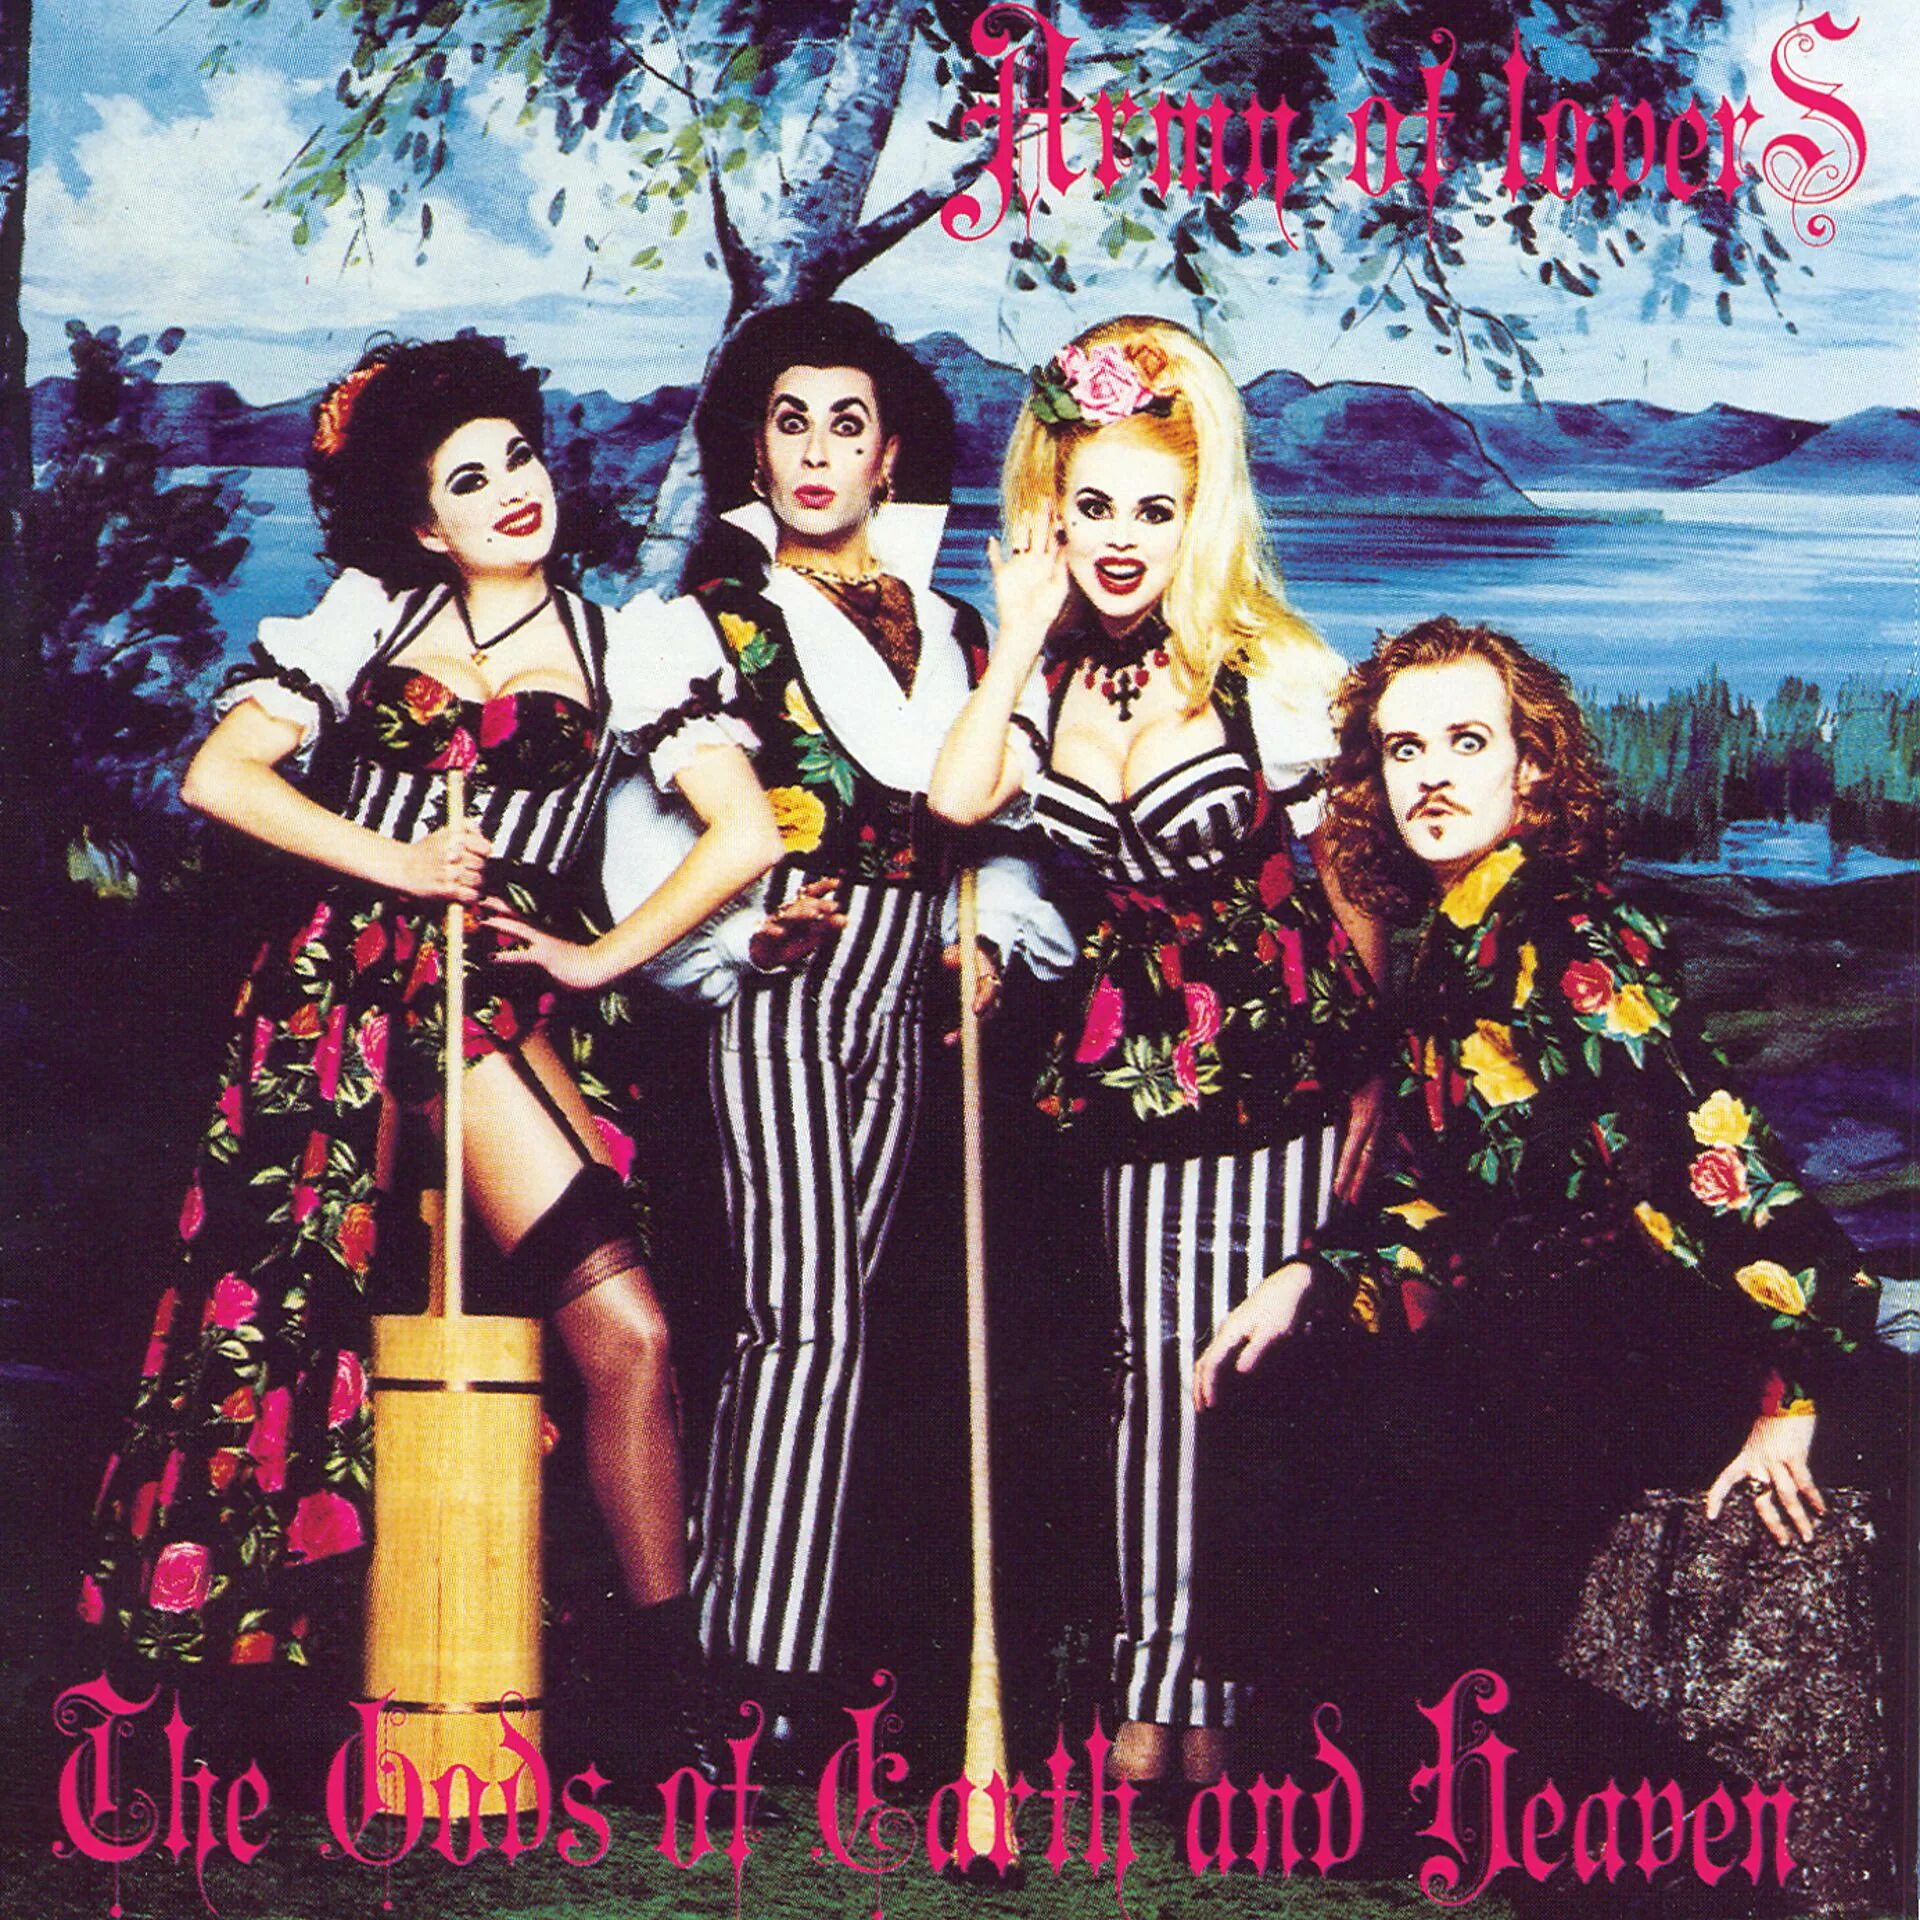 Carry my urn to ukraine перевод песни. Army of lovers the Gods of Earth and Heaven 1993. Группа Army of lovers. Army of lovers album the Gods of Earth and Heaven. Army of lovers 1993.